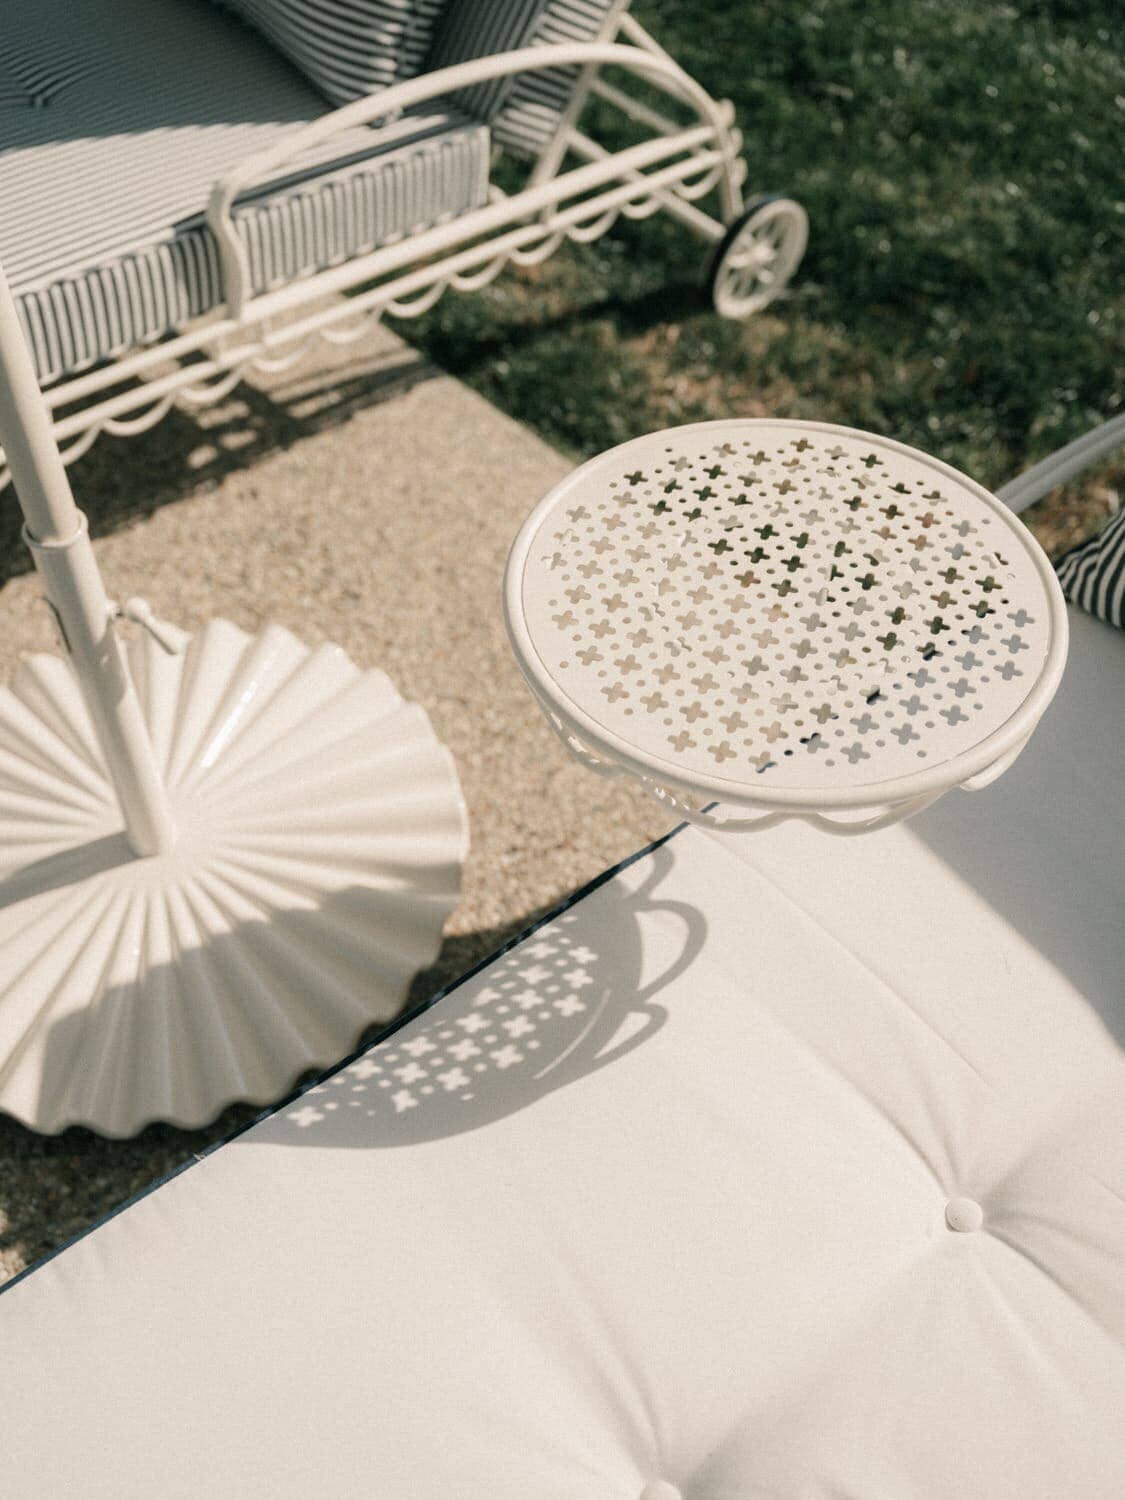 zoomed in image of sun lounger side table